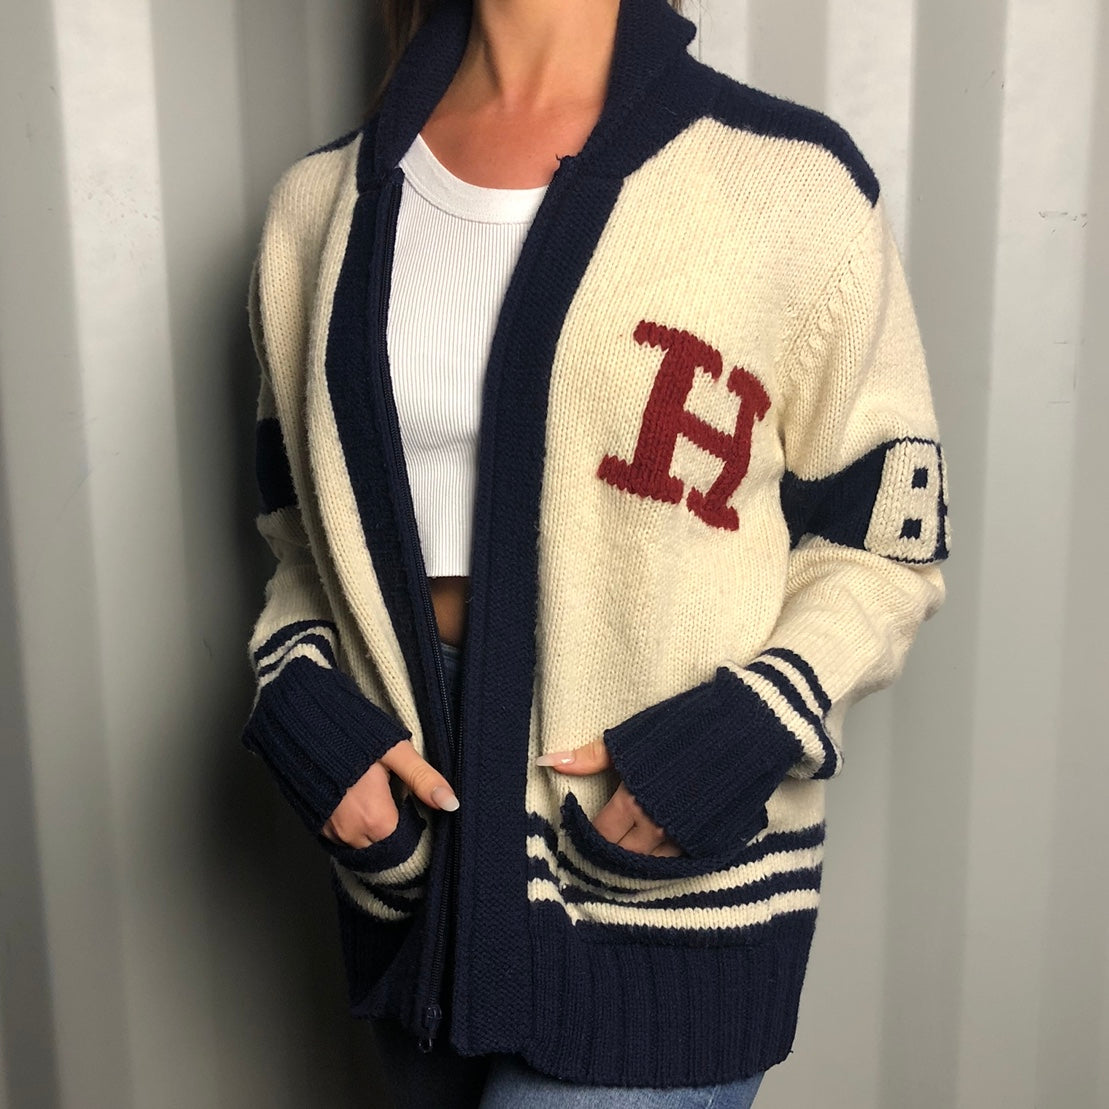 Vintage Tommy Hilfiger Knitted Wool Cardigan